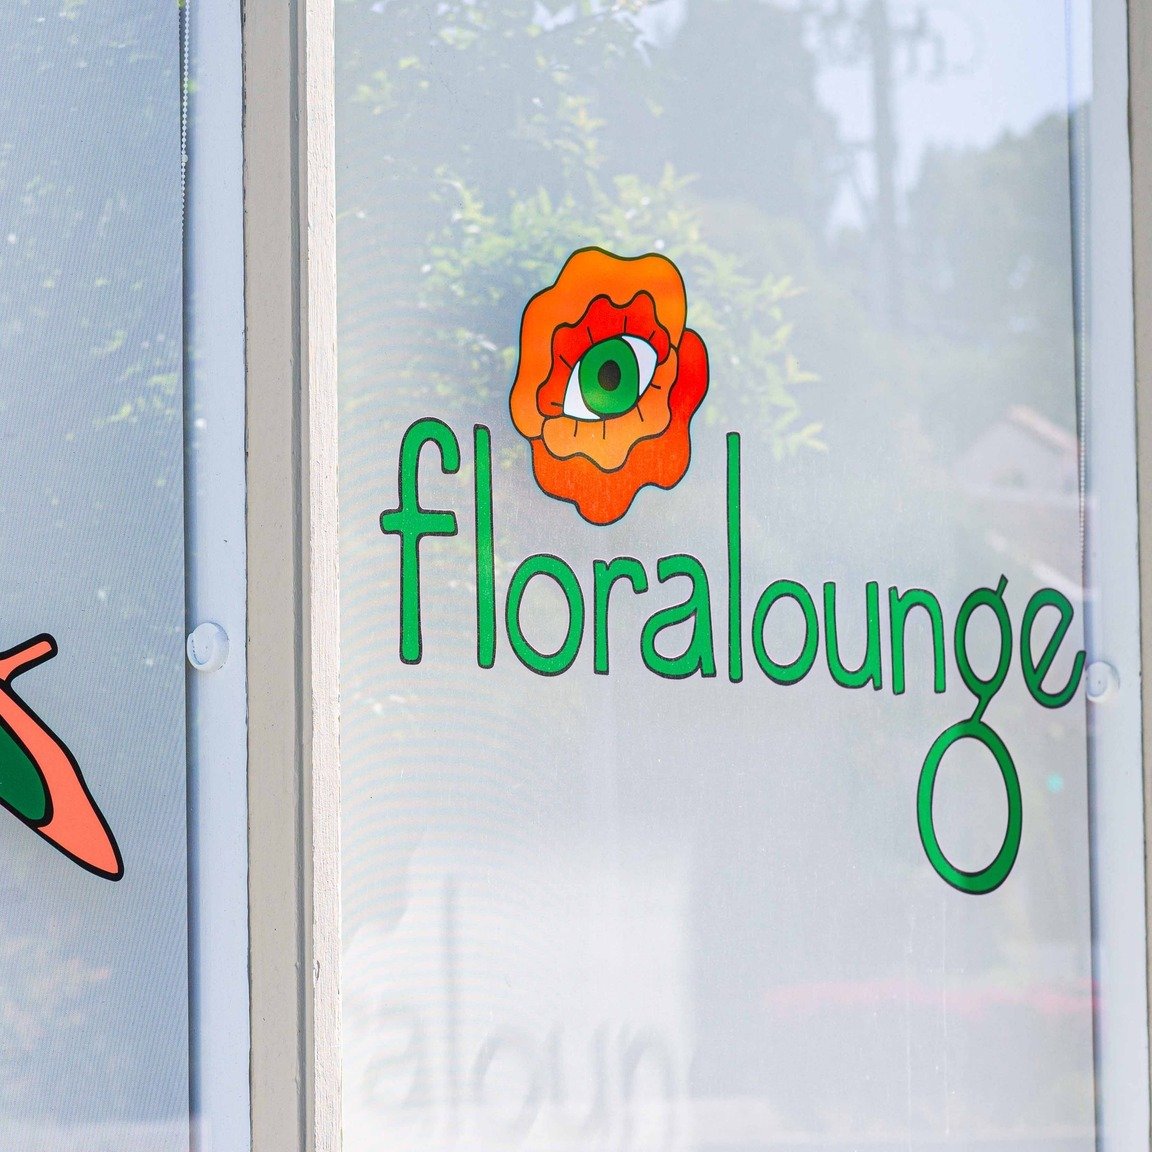 Local Business Spotlight: Floralounge 🌷🌸💐🌺
Luckily, there's a not-so-secret place nearby my home to pick up lush bouquets for any and all occasions&mdash;whether I'm looking to surprise my wife for Mother's Day, embellish one of my listing's kitc